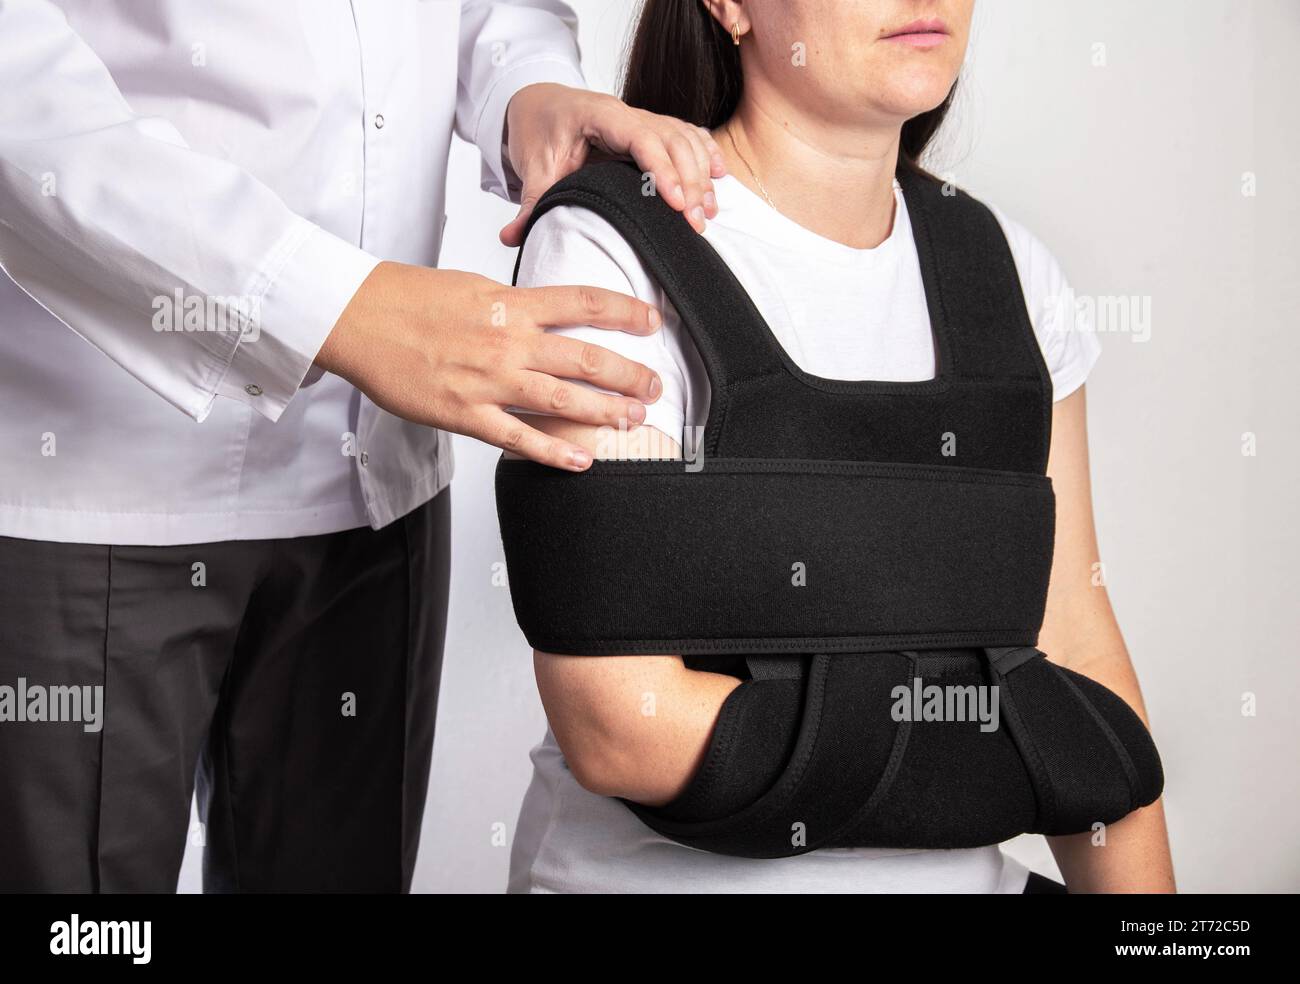 A doctor surgeon examines a girl's shoulder after surgery. Bandage on the shoulder joint during rehabilitation after surgery on the shoulder joint, te Stock Photo